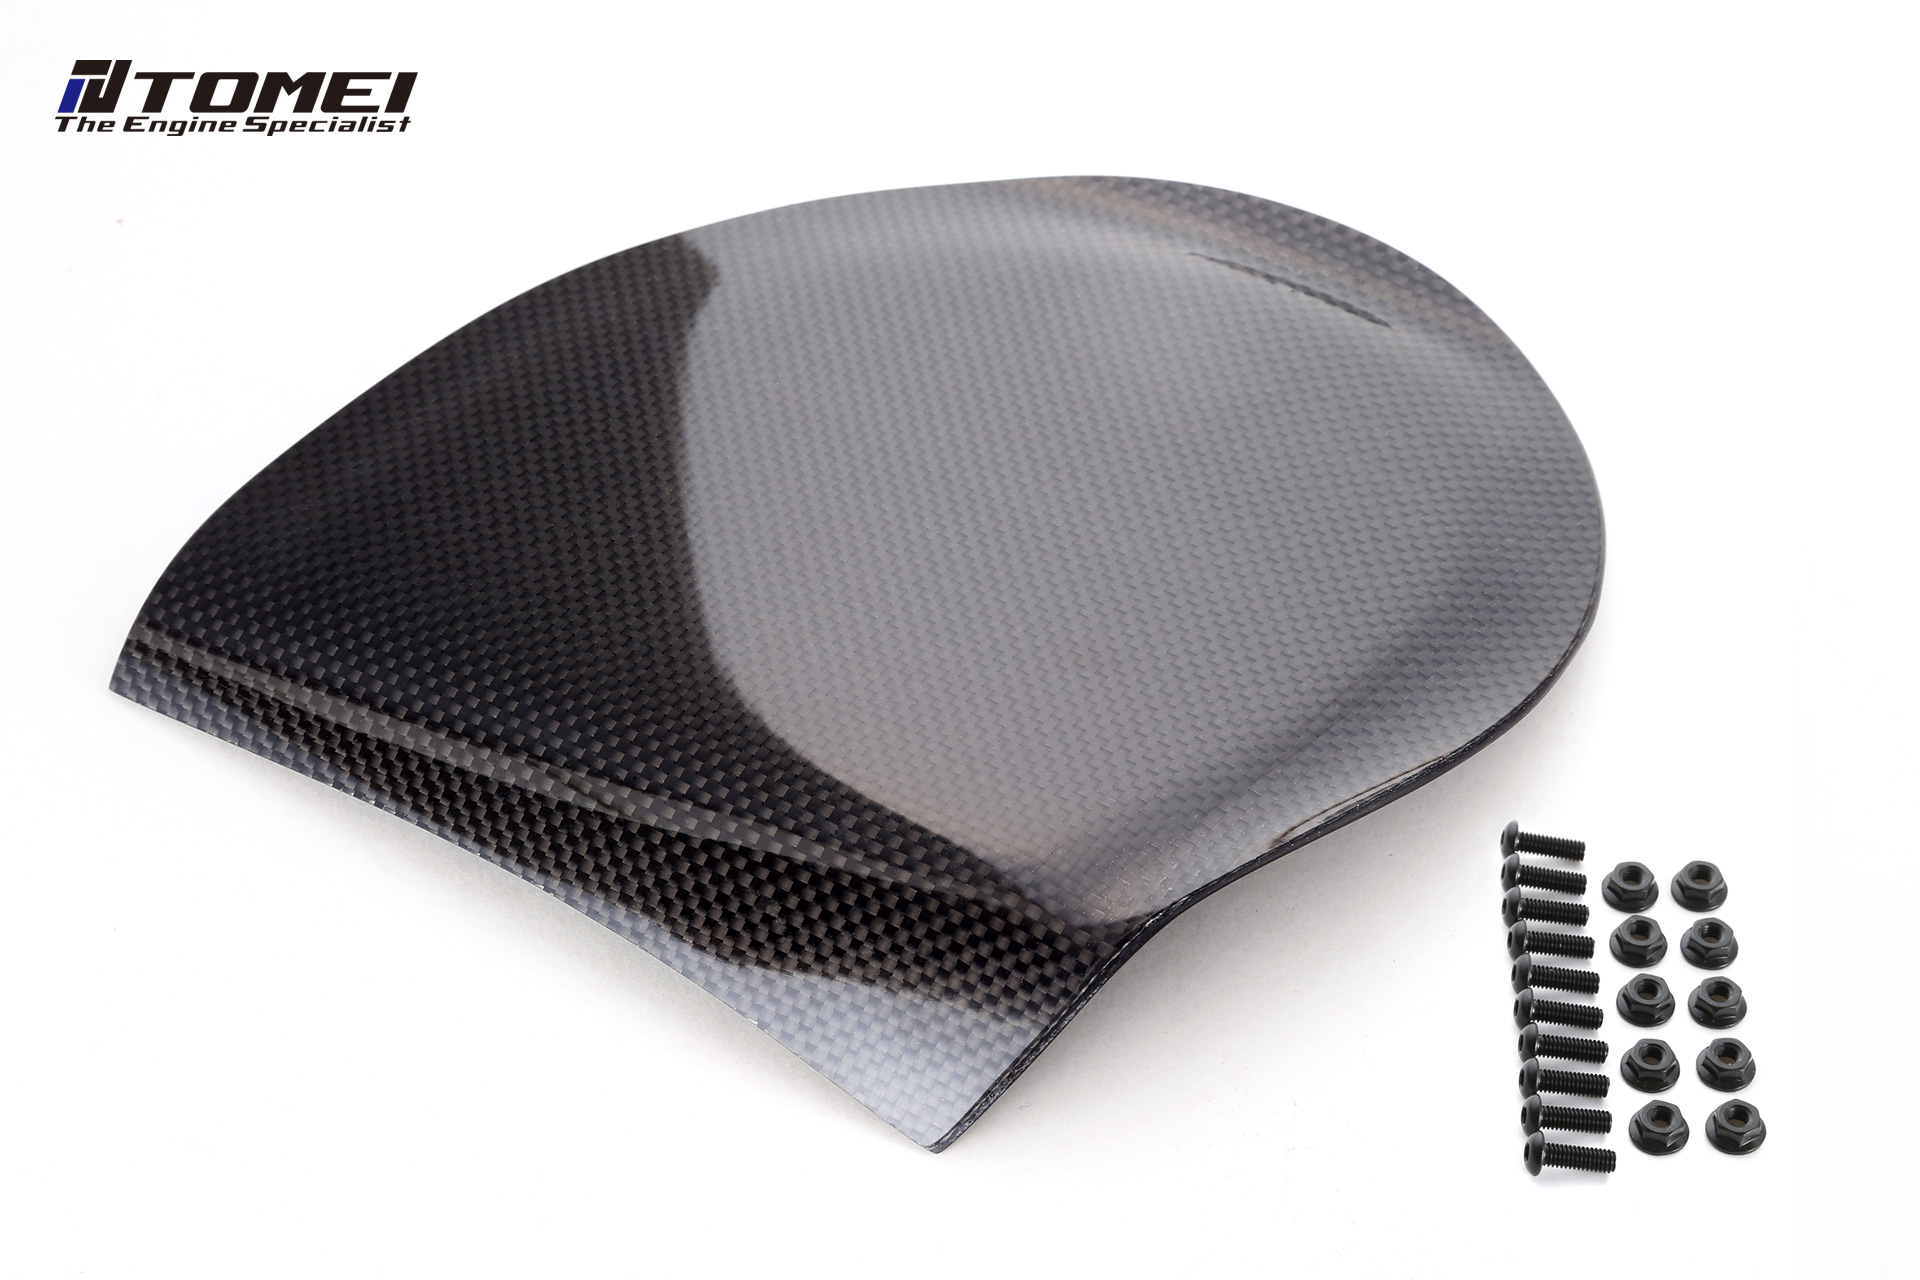 Tomei_Ecoboost_carbonCover